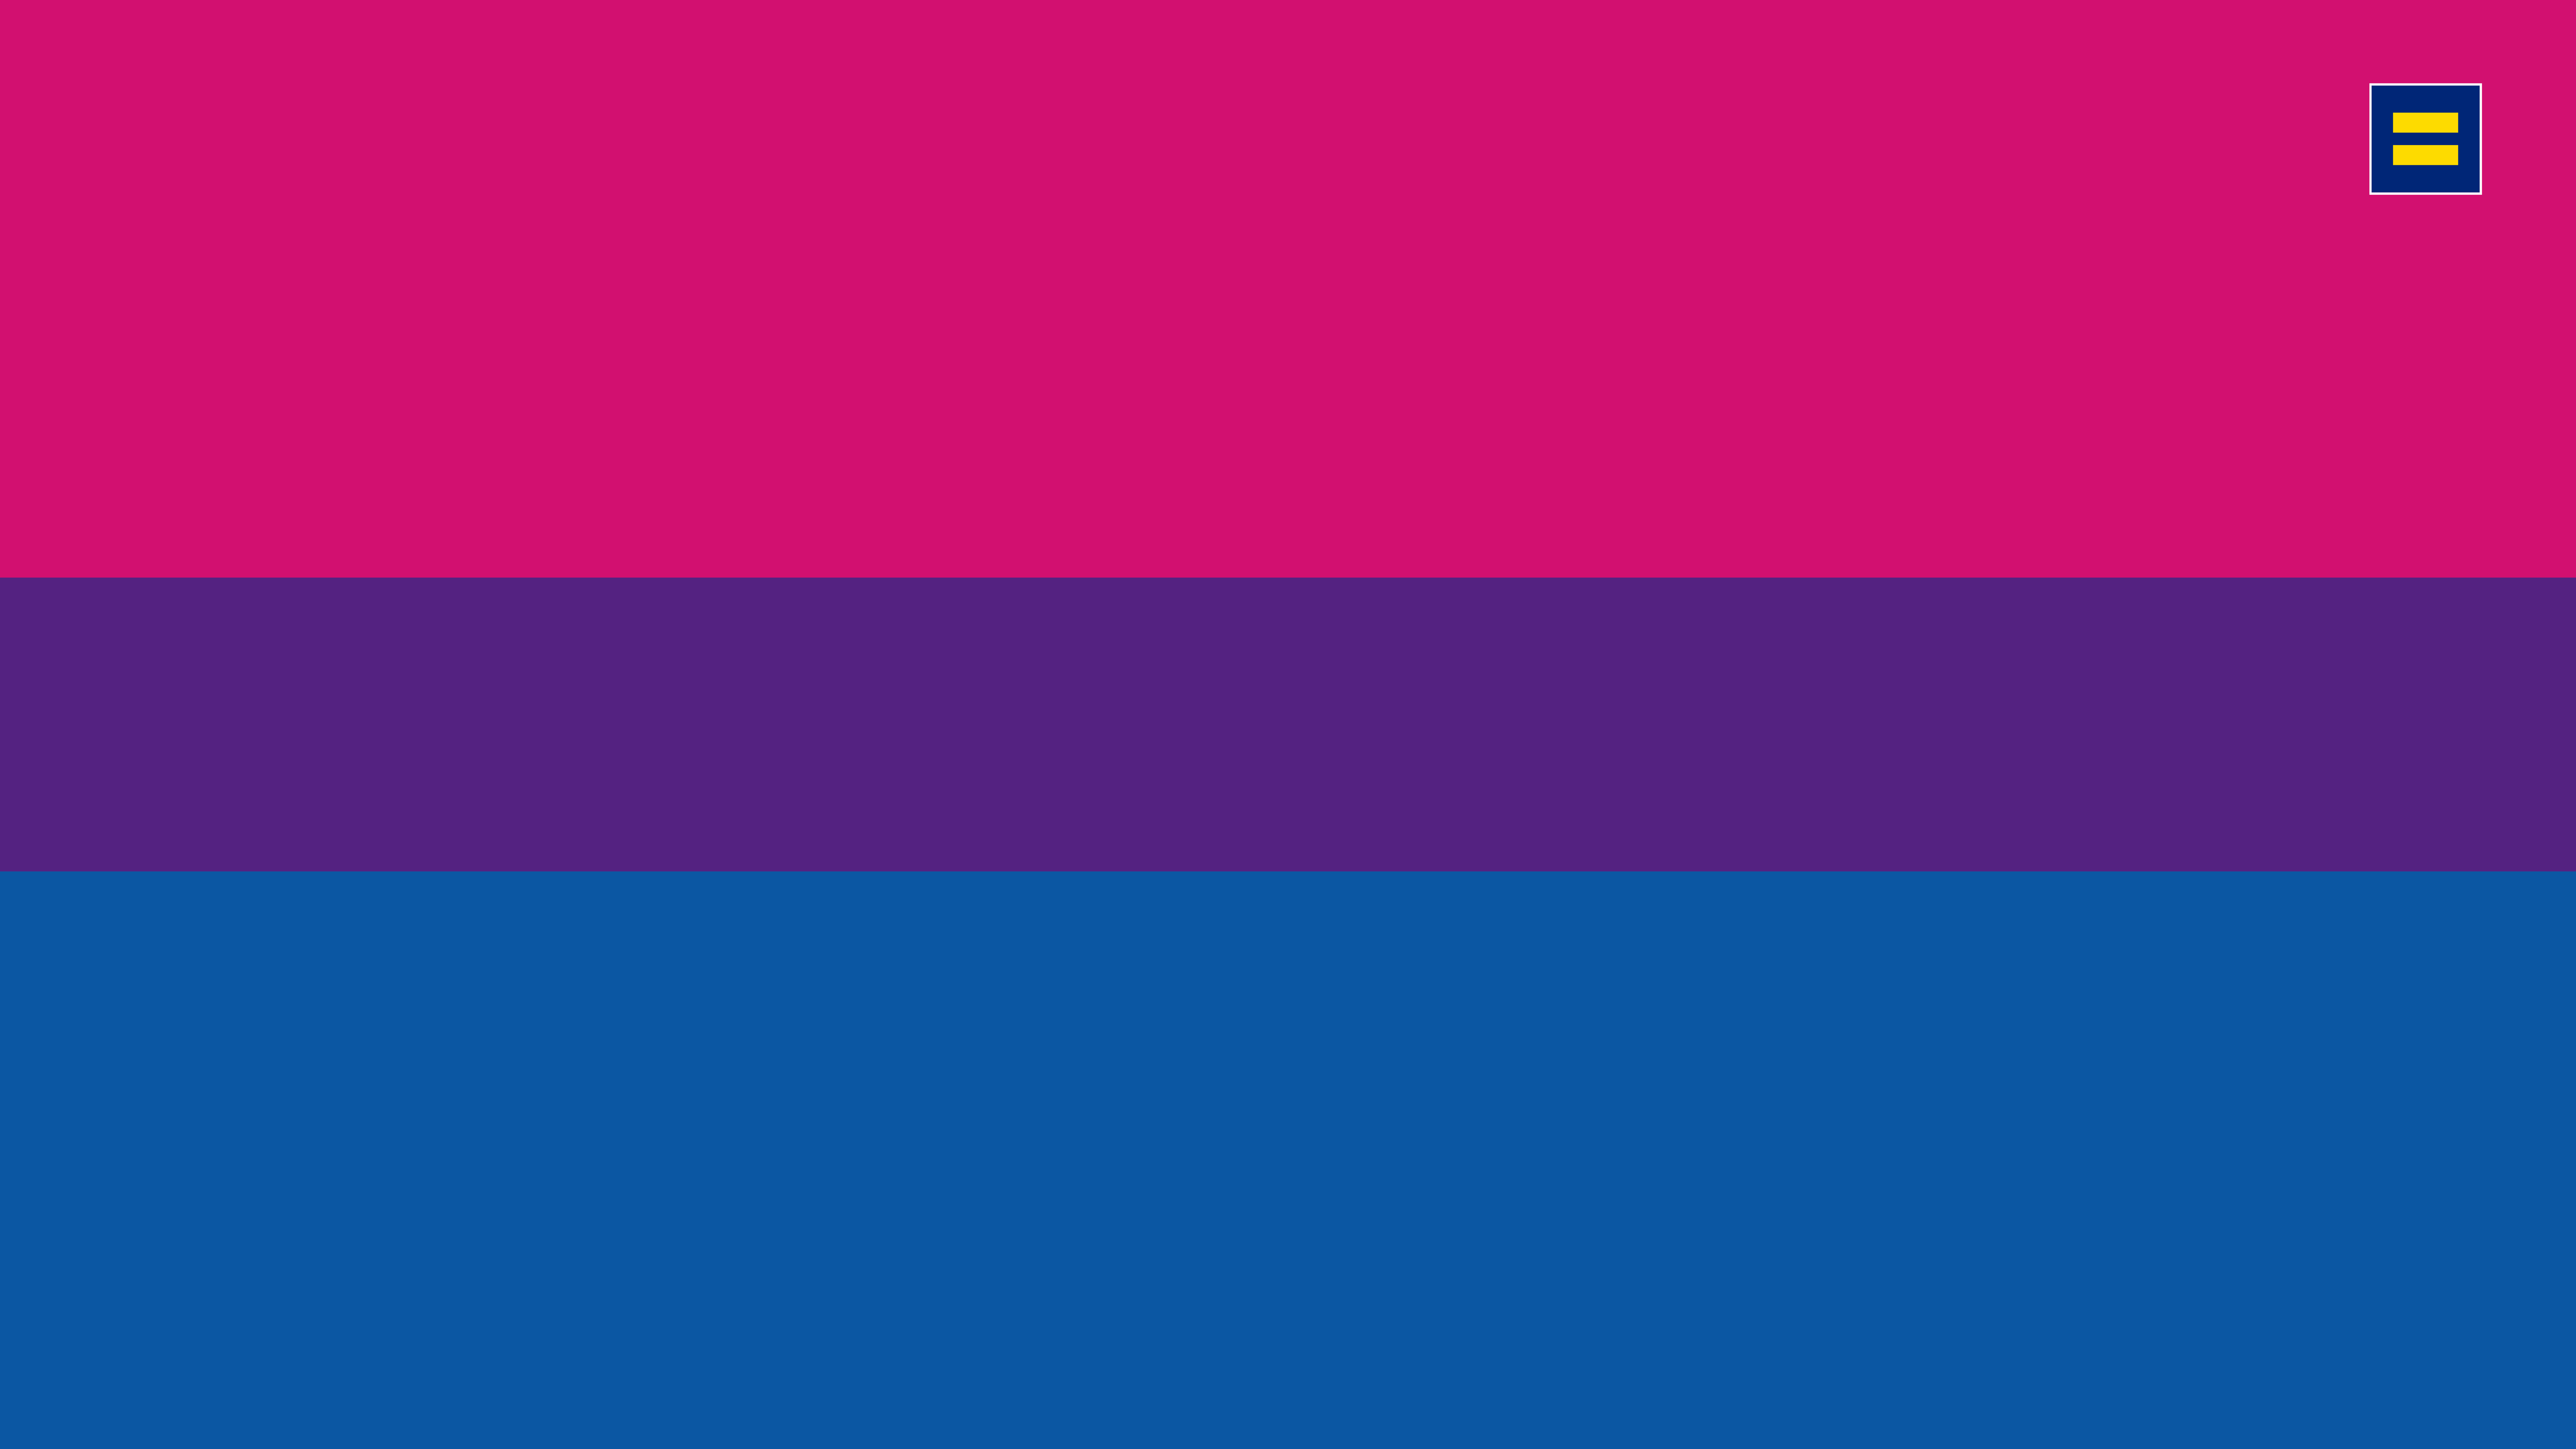 Bisexual Flag - Show your pride and promote LGBTQ rights